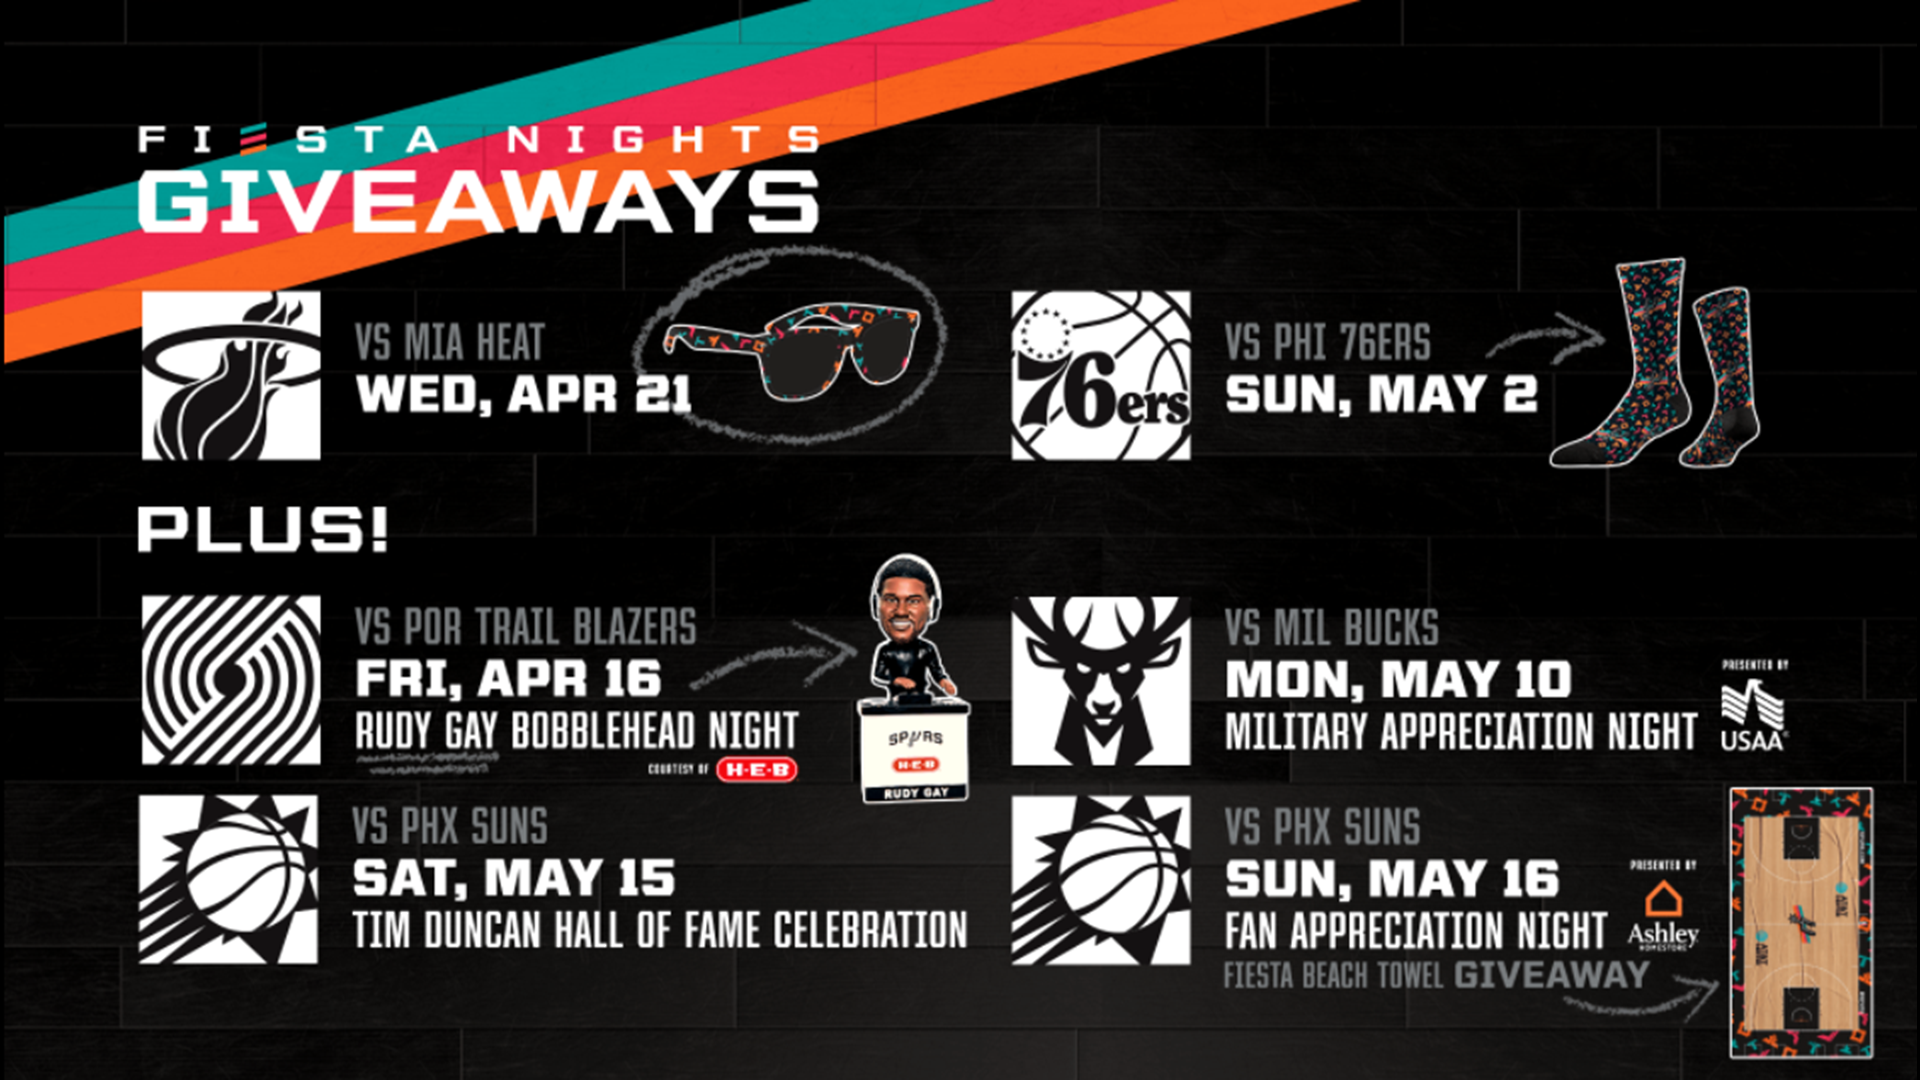 Here's your chance to grab a bobblehead, Fiesta-themed sunglasses, socks or beach towels.